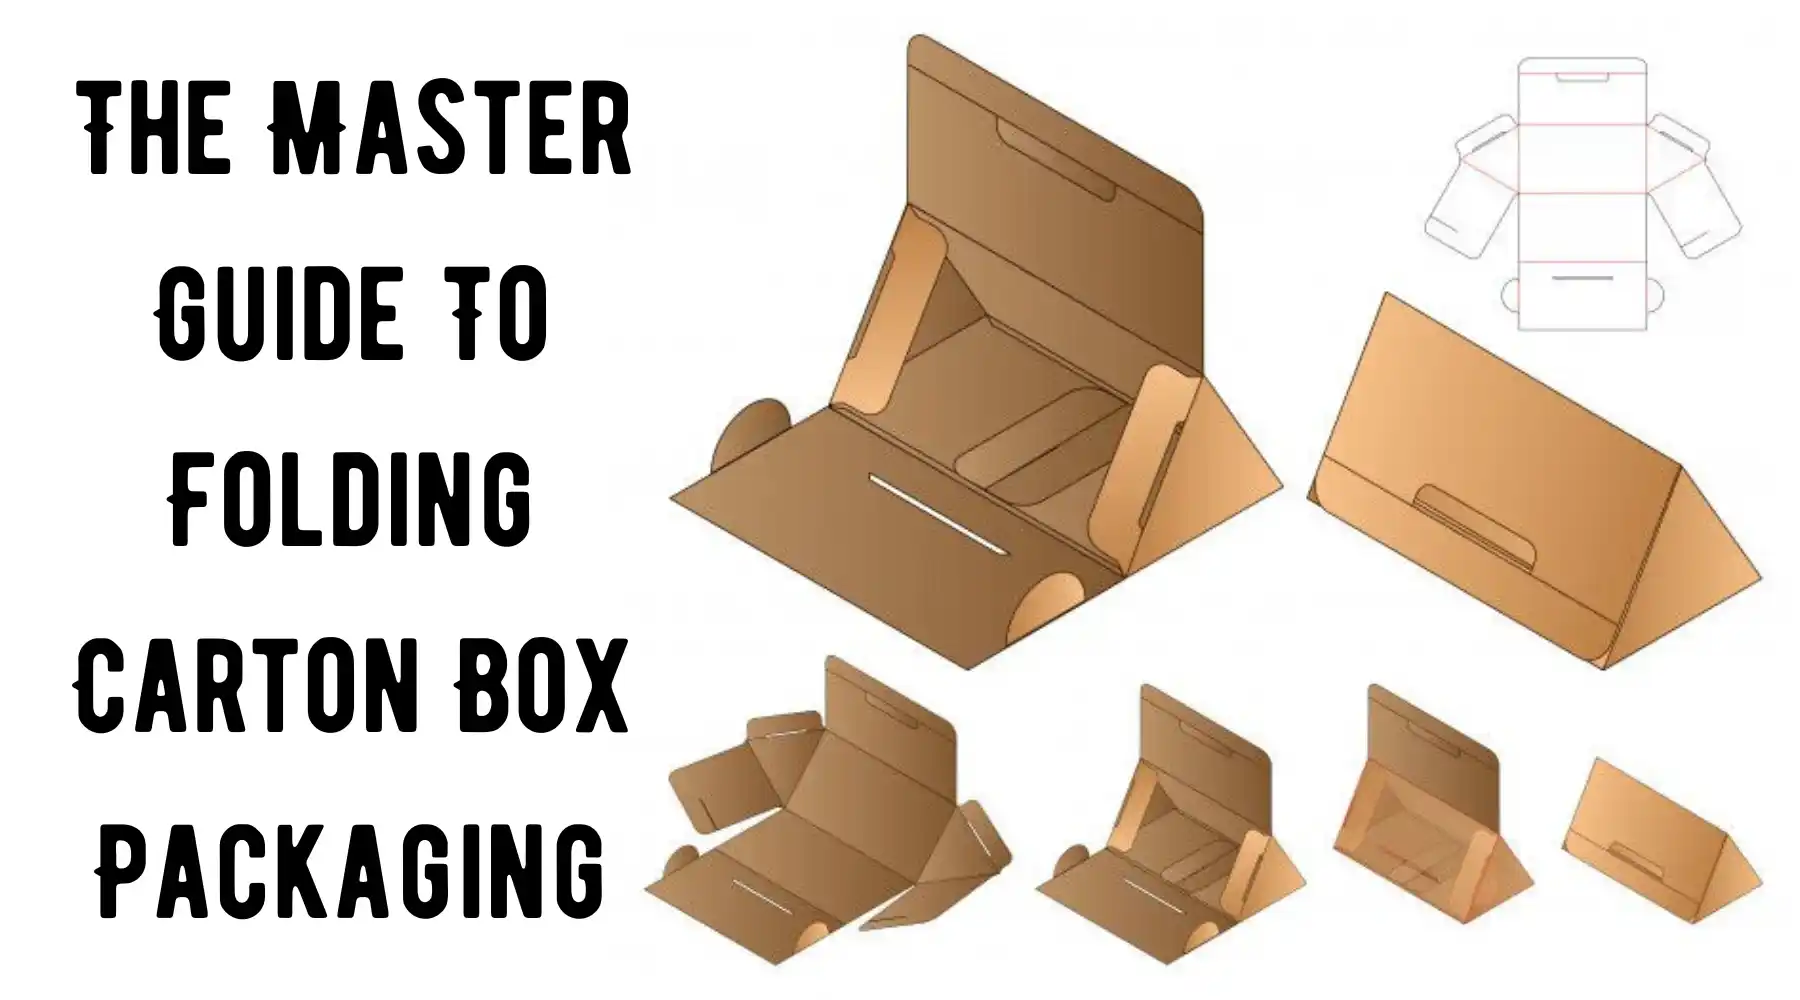 The Master Guide To Folding Carton Box Packaging.webp